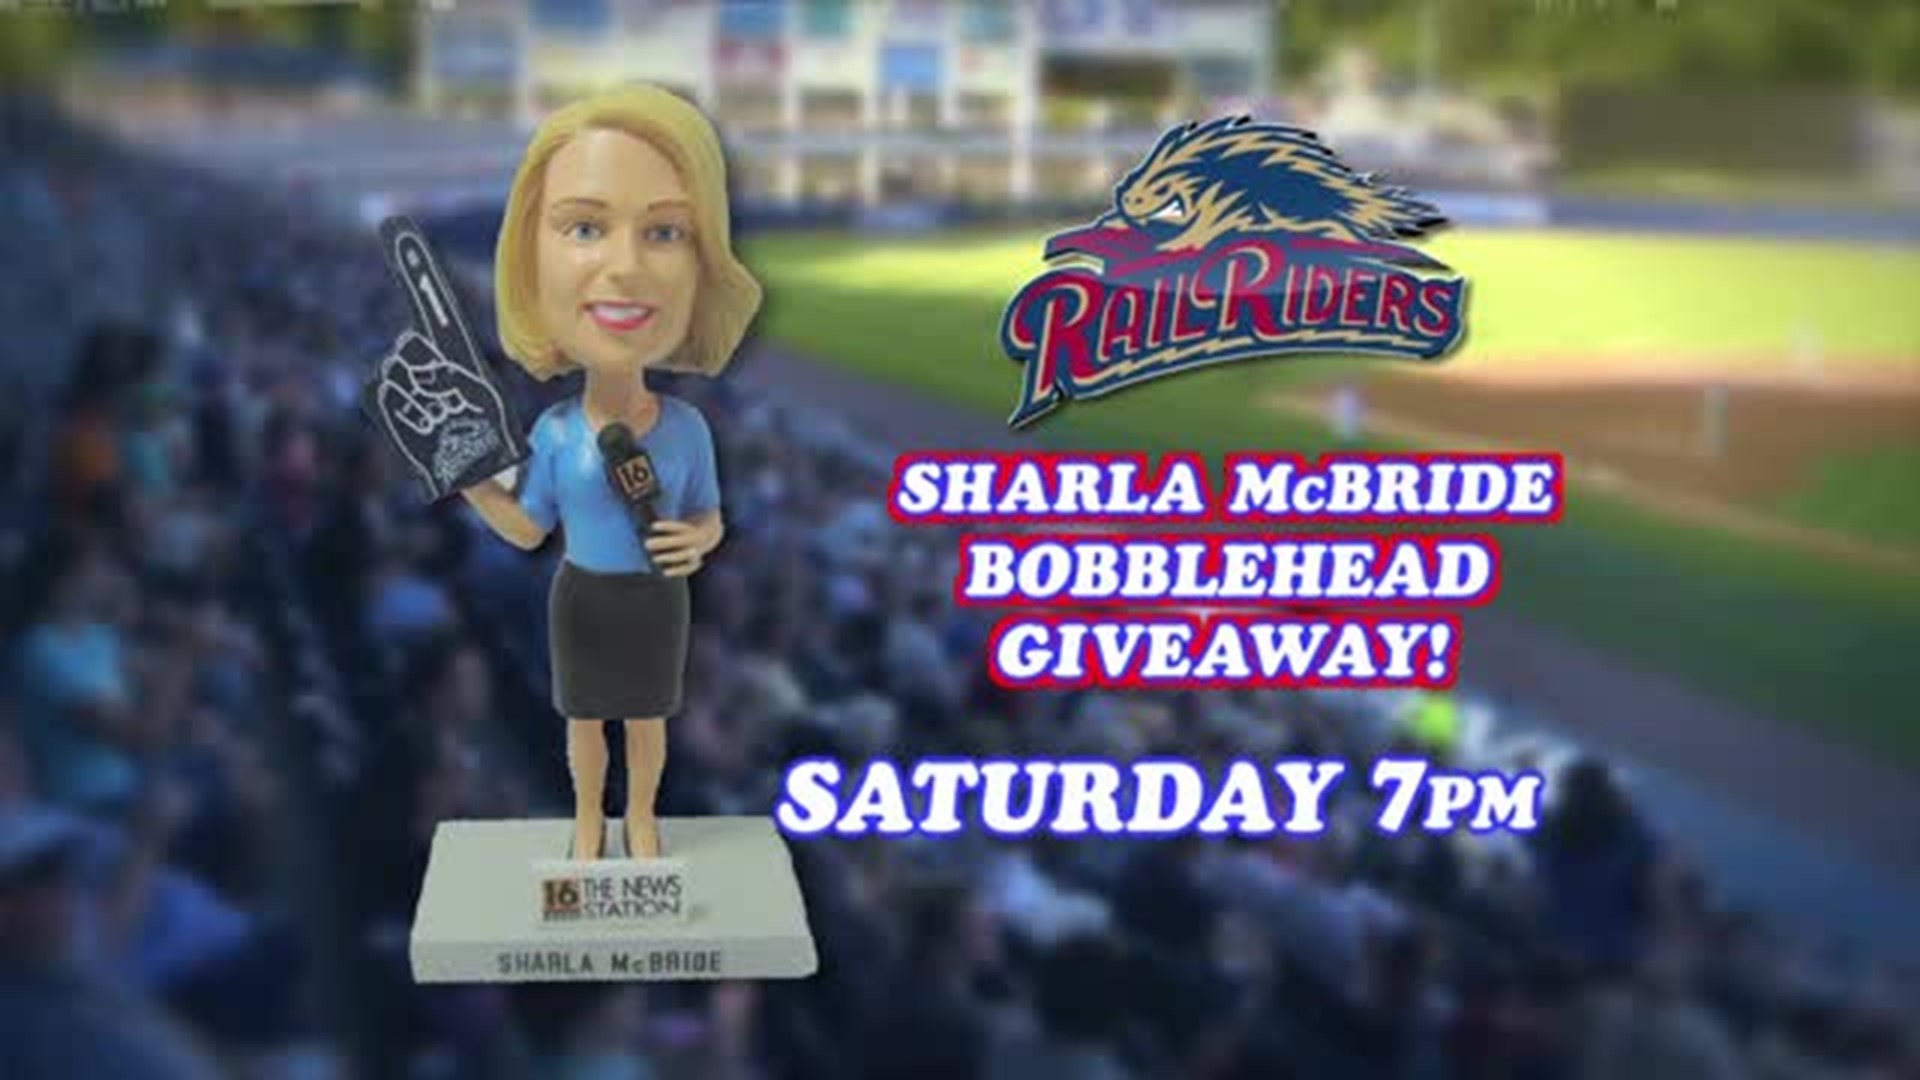 Get Your Very Own Sharla McBride Bobblehead